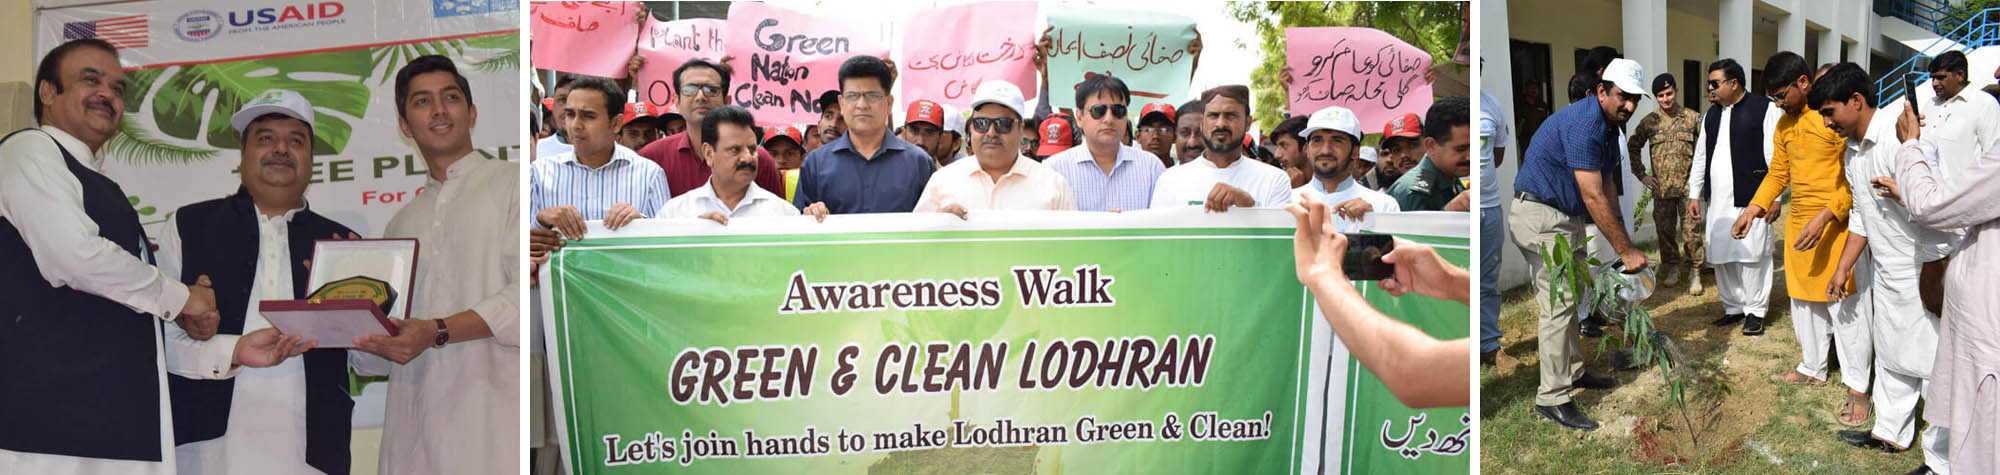 Green and Clean Lodhran Campaign